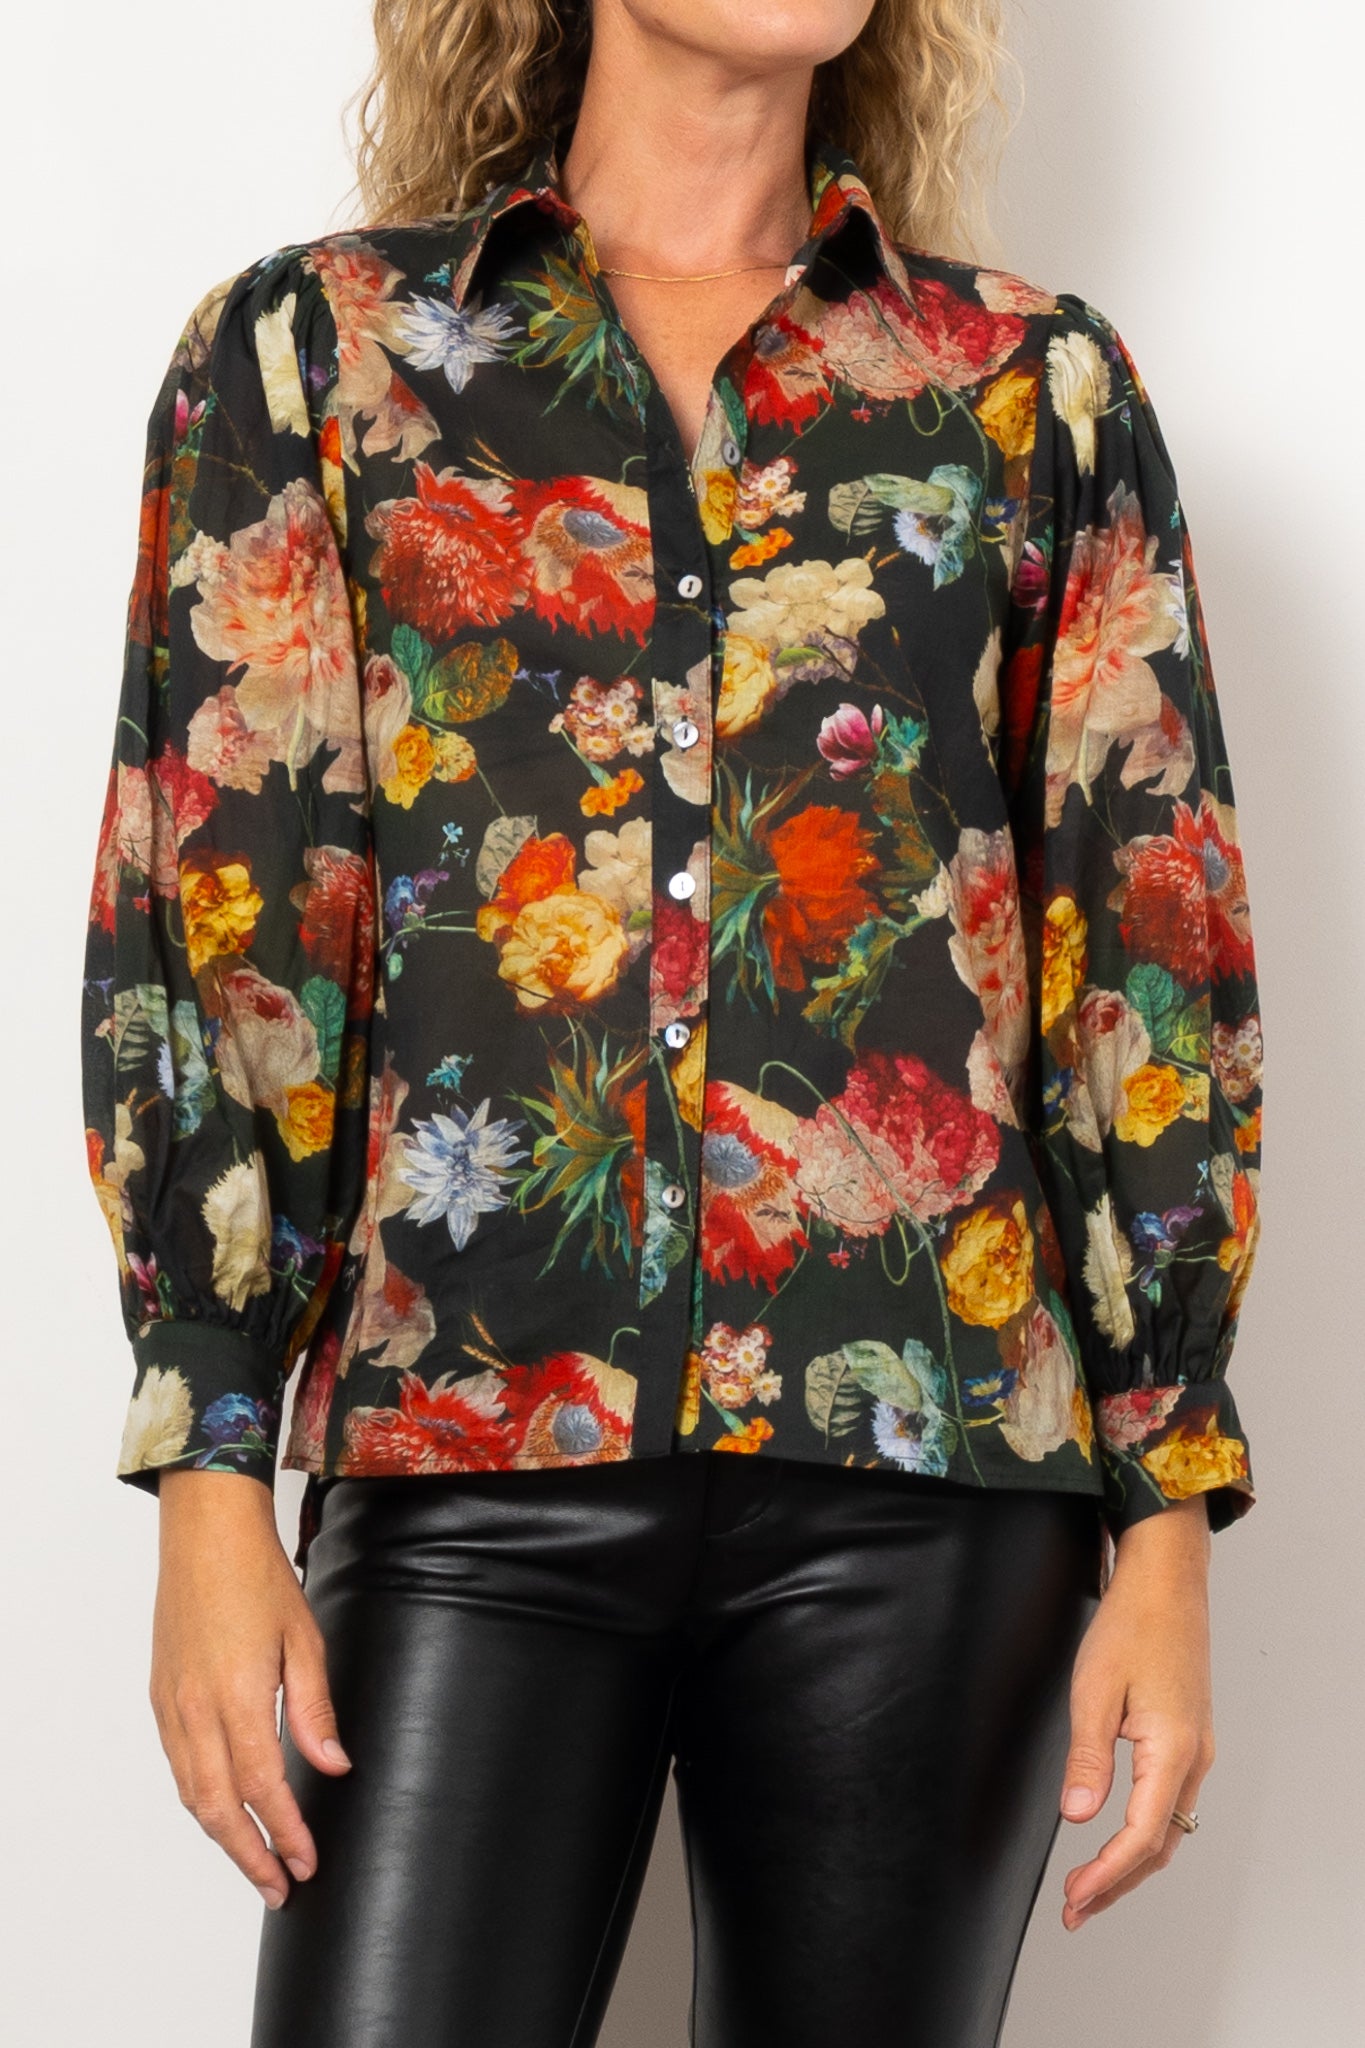 COOP by Trelise Cooper Autumn Leaves Shirt